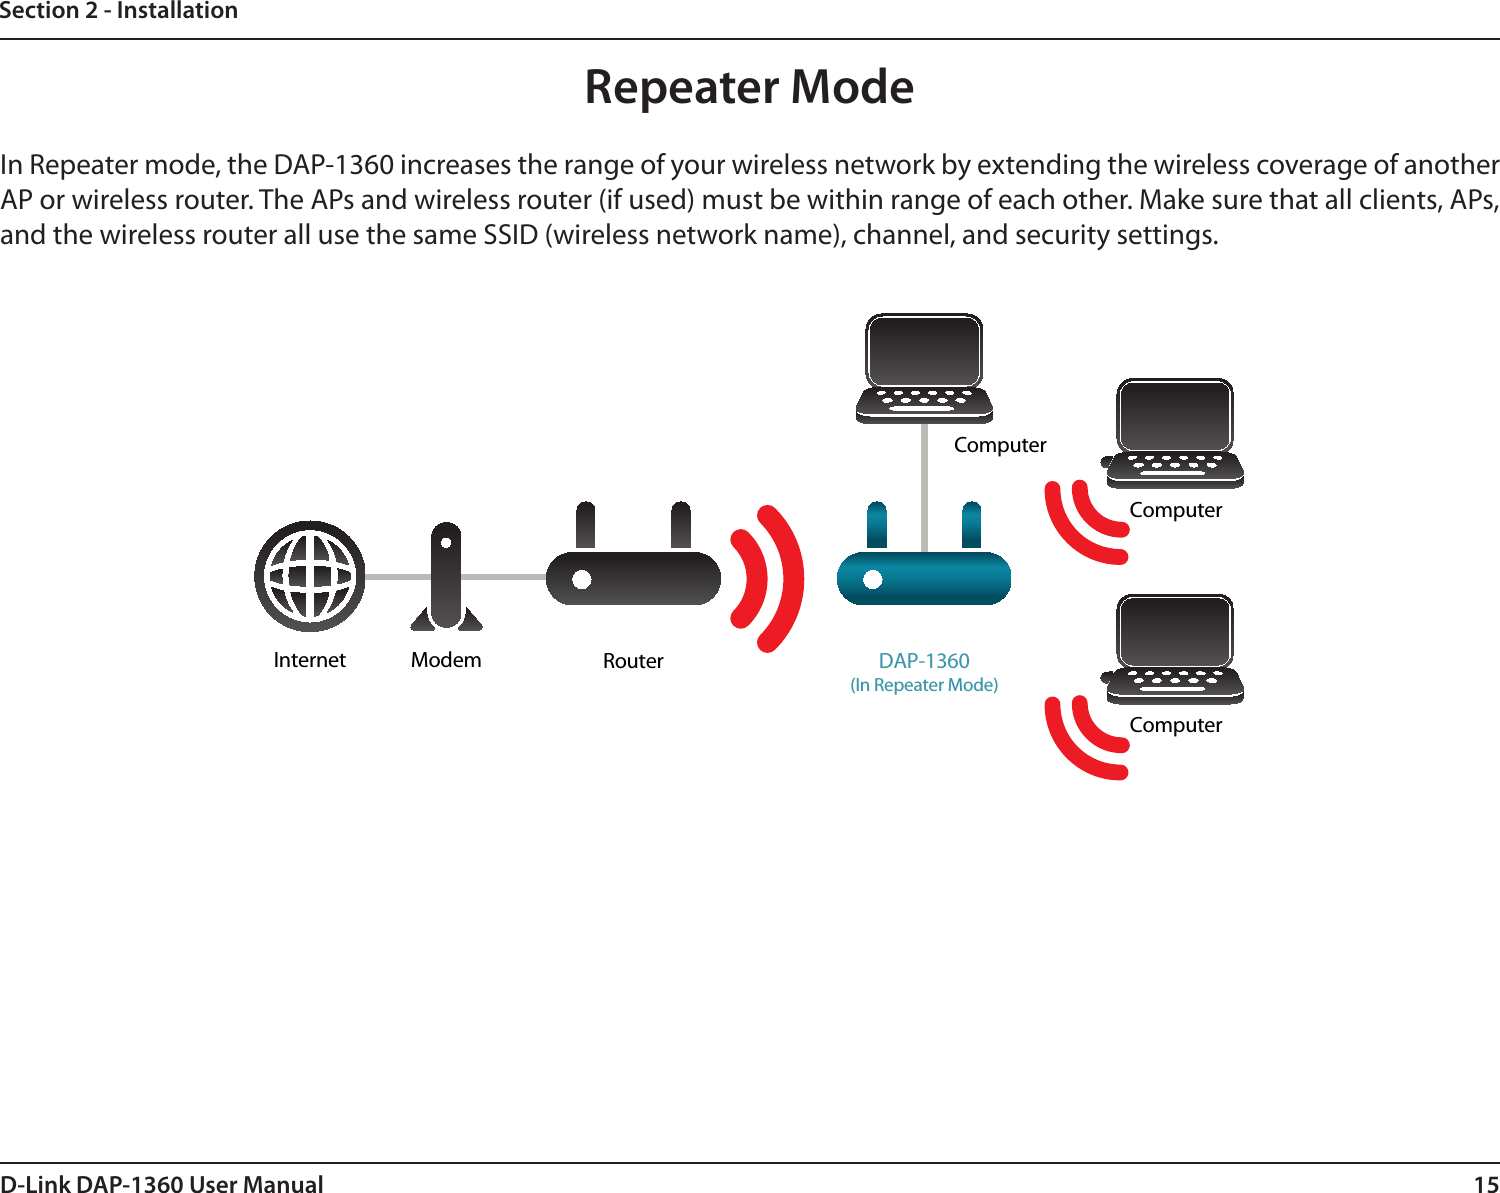 15D-Link DAP-1360 User ManualSection 2 - InstallationRepeater ModeIn Repeater mode, the DAP-1360 increases the range of your wireless network by extending the wireless coverage of another AP or wireless router. The APs and wireless router (if used) must be within range of each other. Make sure that all clients, APs, and the wireless router all use the same SSID (wireless network name), channel, and security settings.ComputerInternet Modem Router DAP-1360(In Repeater Mode)ComputerComputer